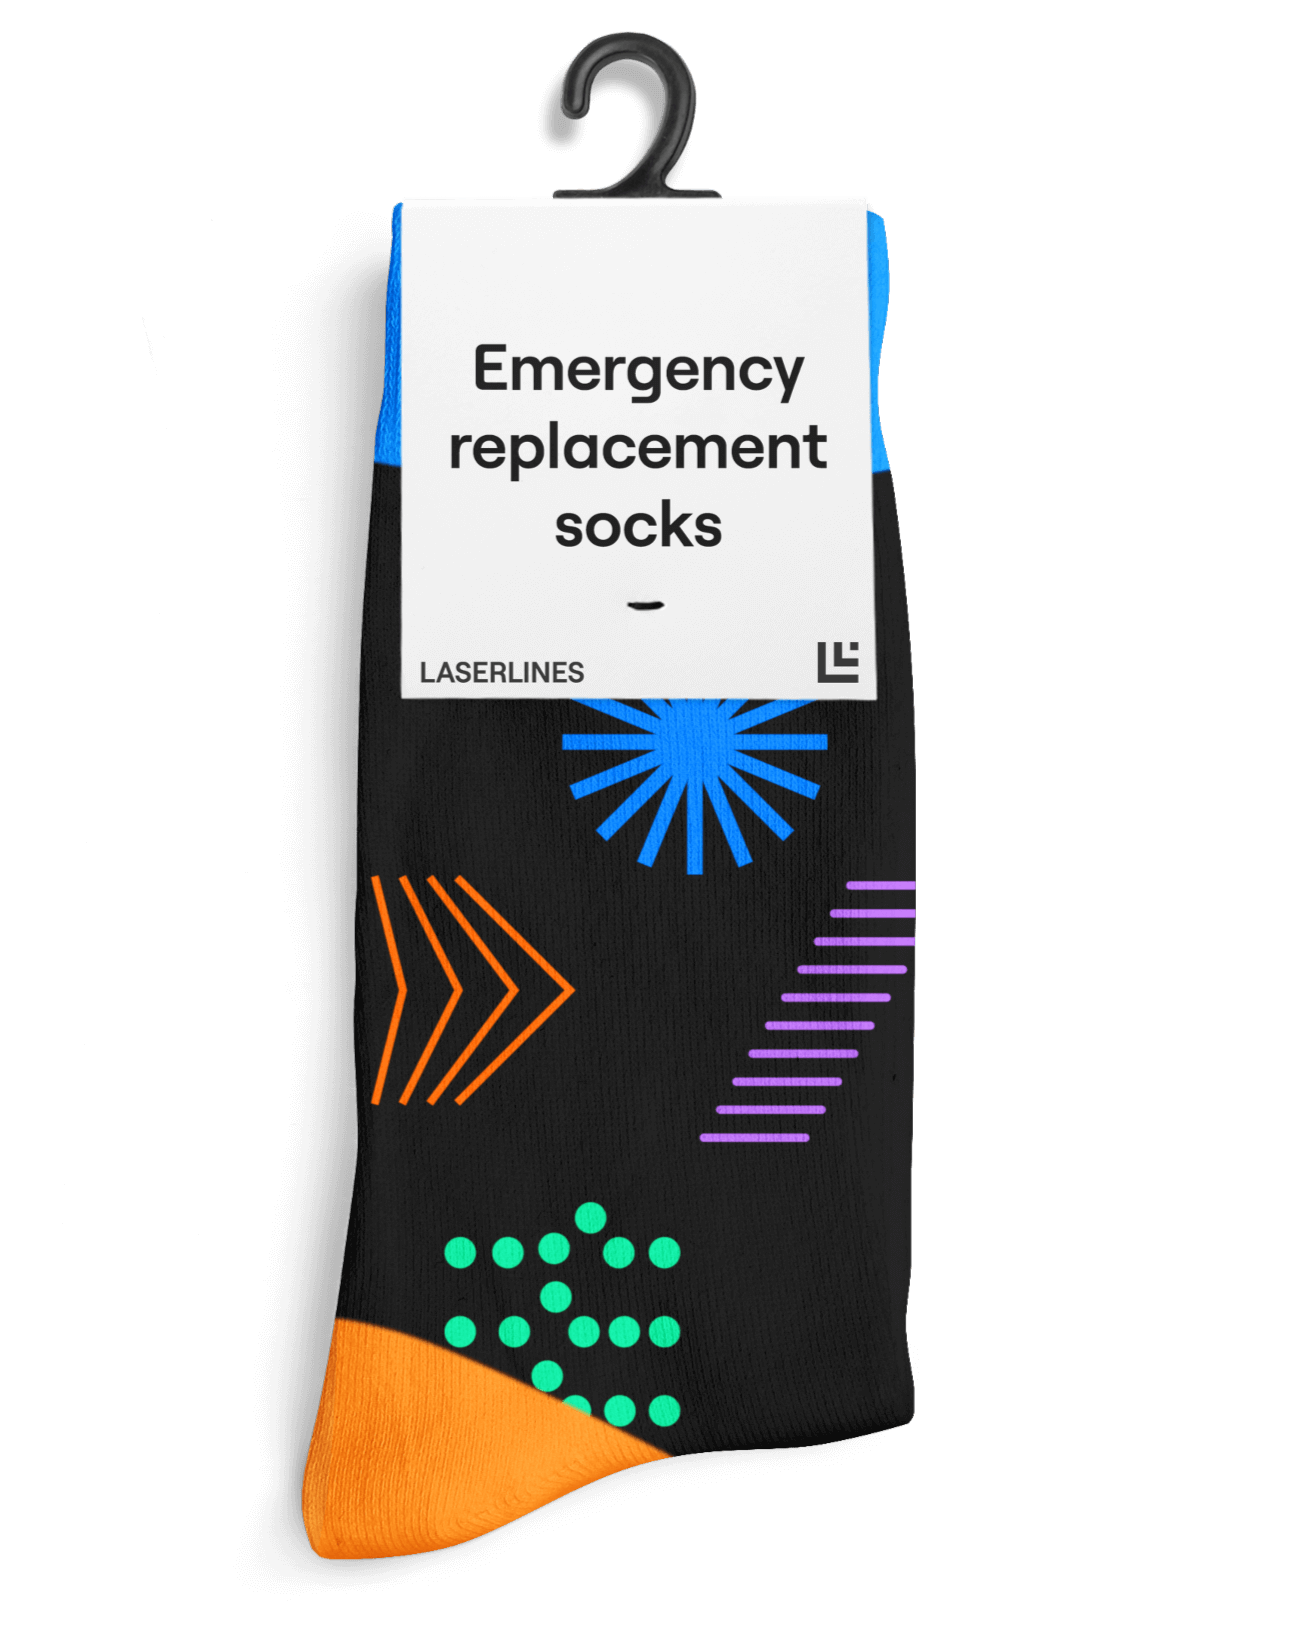 Emergency replacement socks